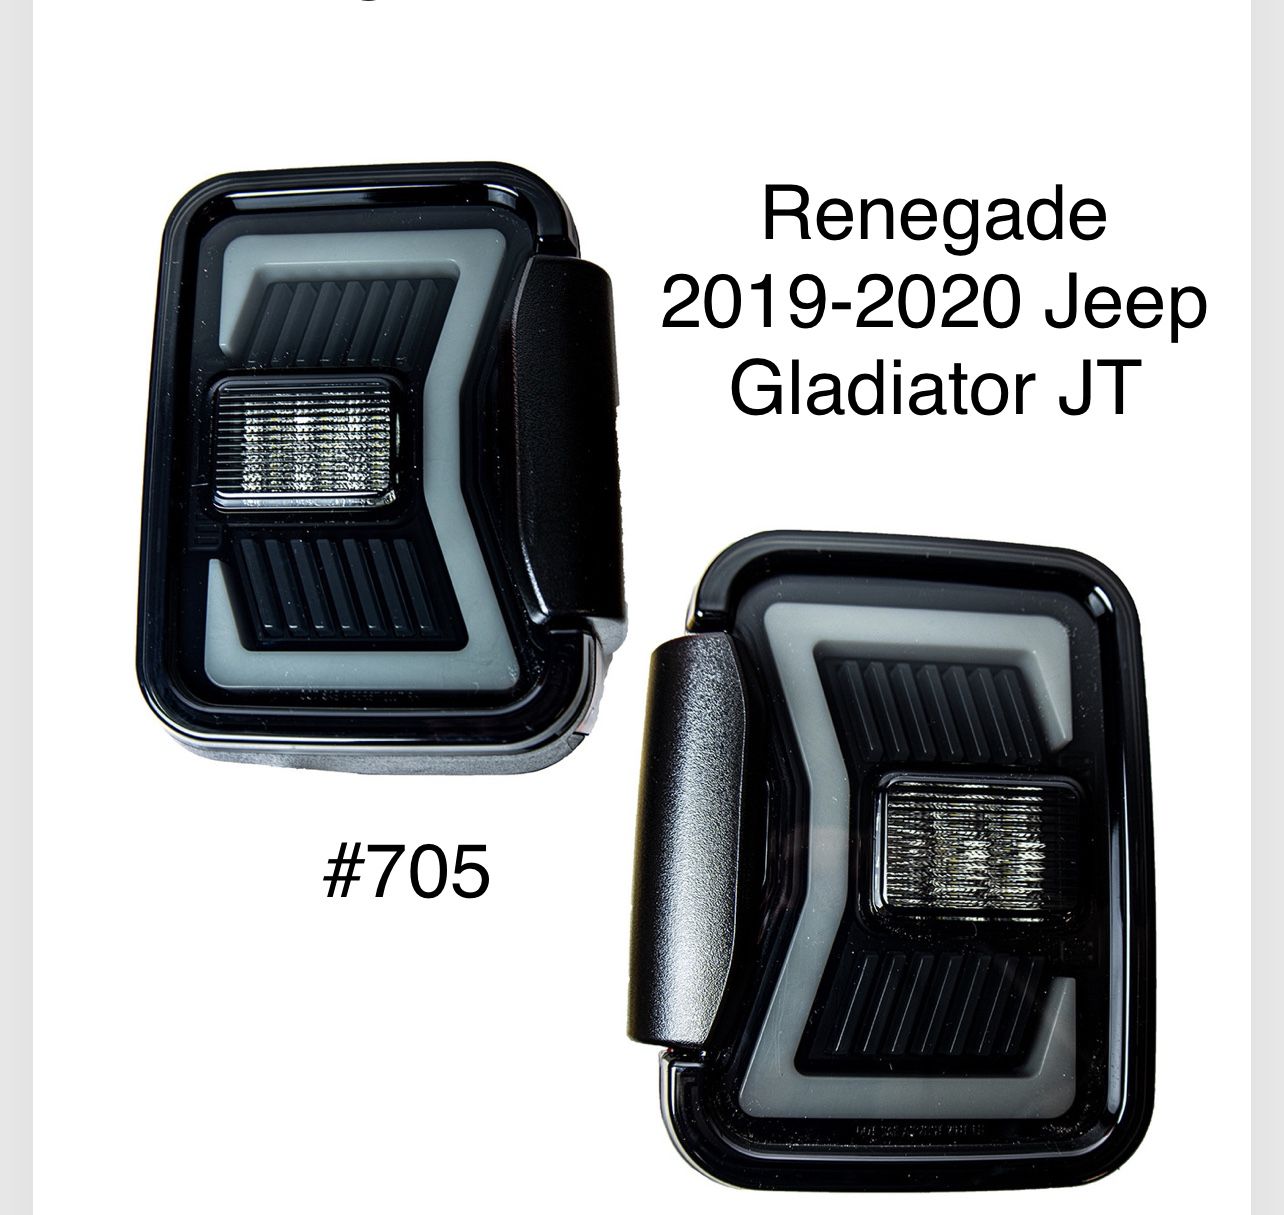 2019 TO 2020 Jeep Gladiator JT Renegade LED Taillights (Black/Smoke) (FOR THE PAIR)